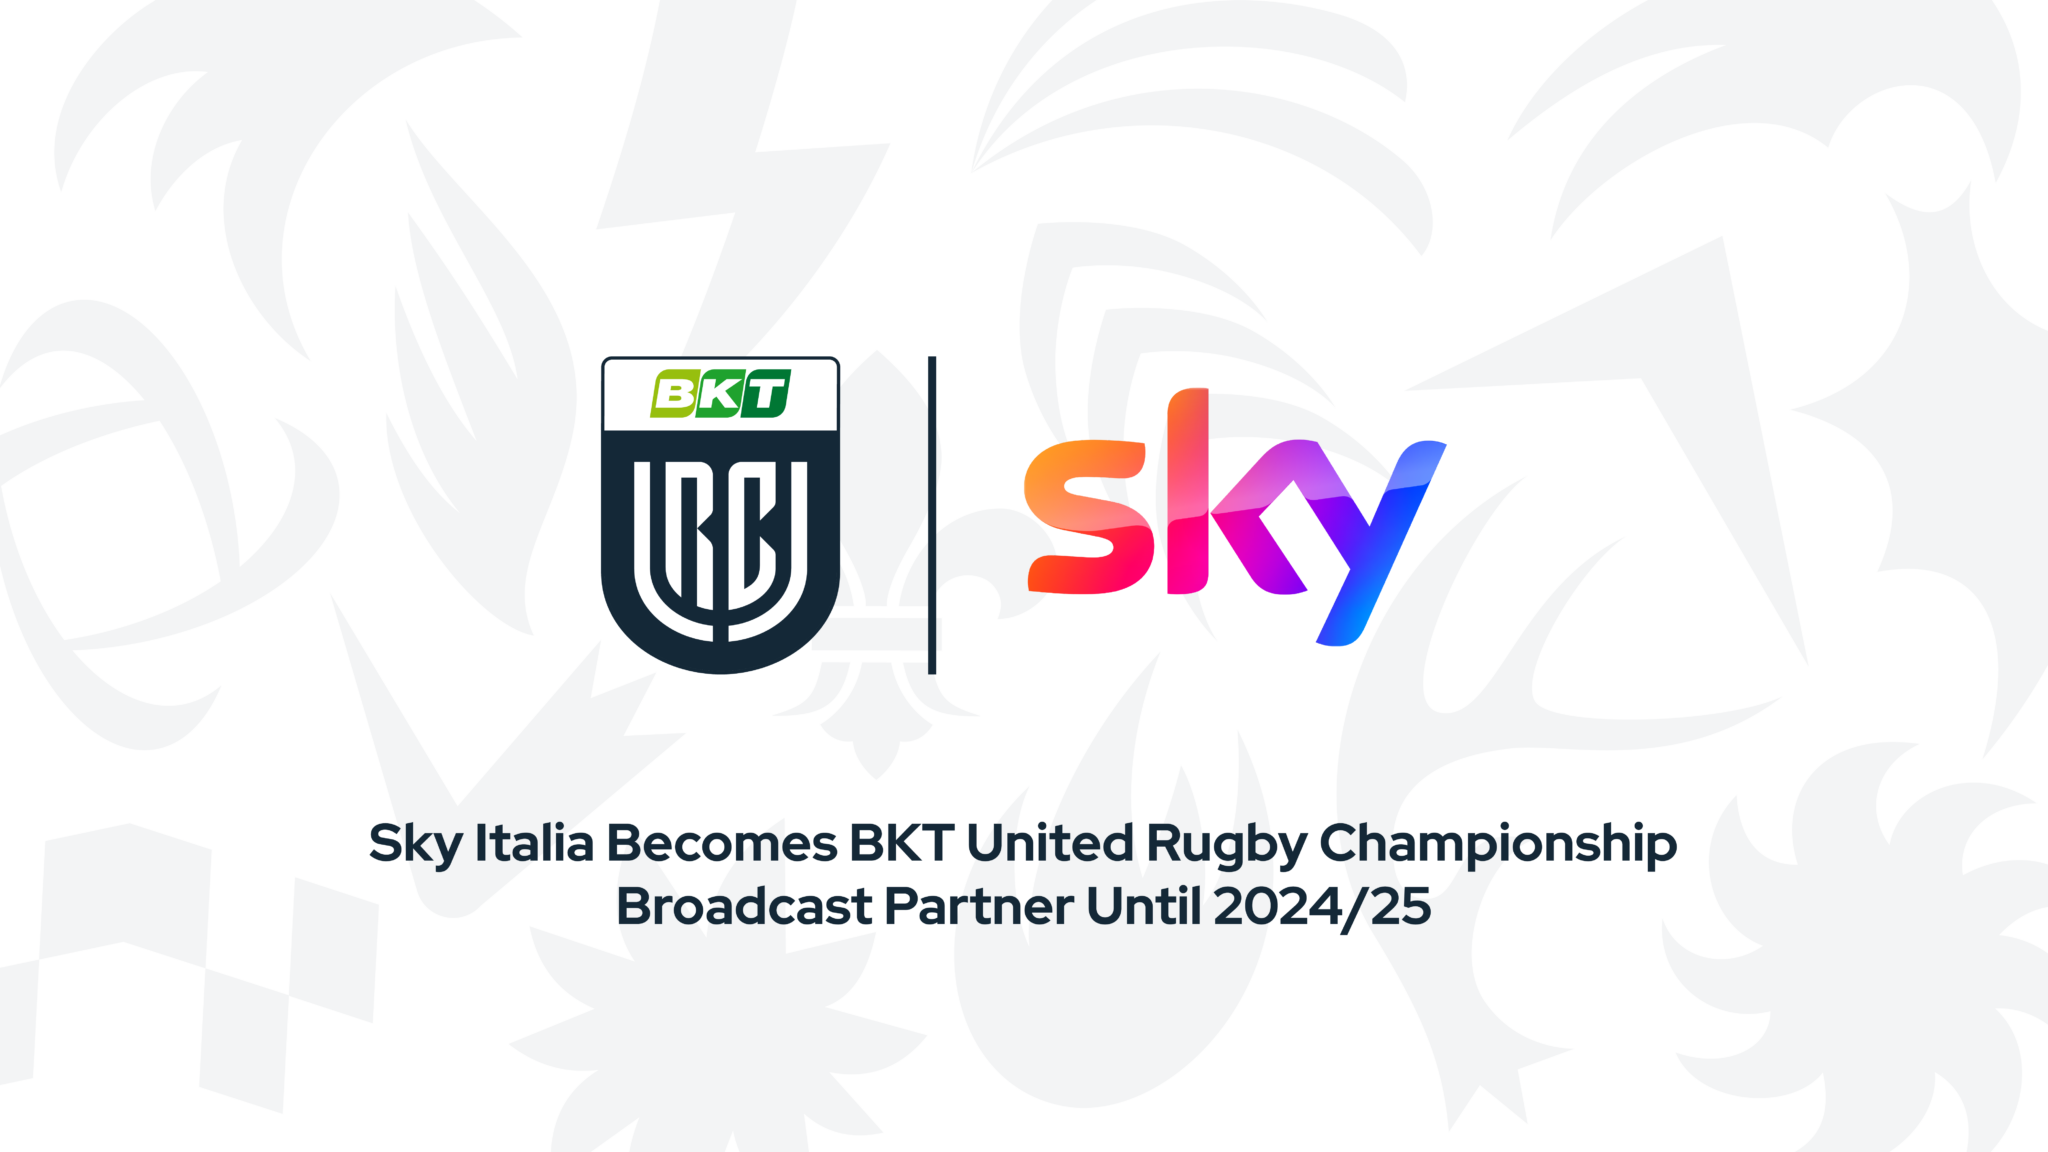 Sky Italia to be home of the United Rugby Championship in Italy